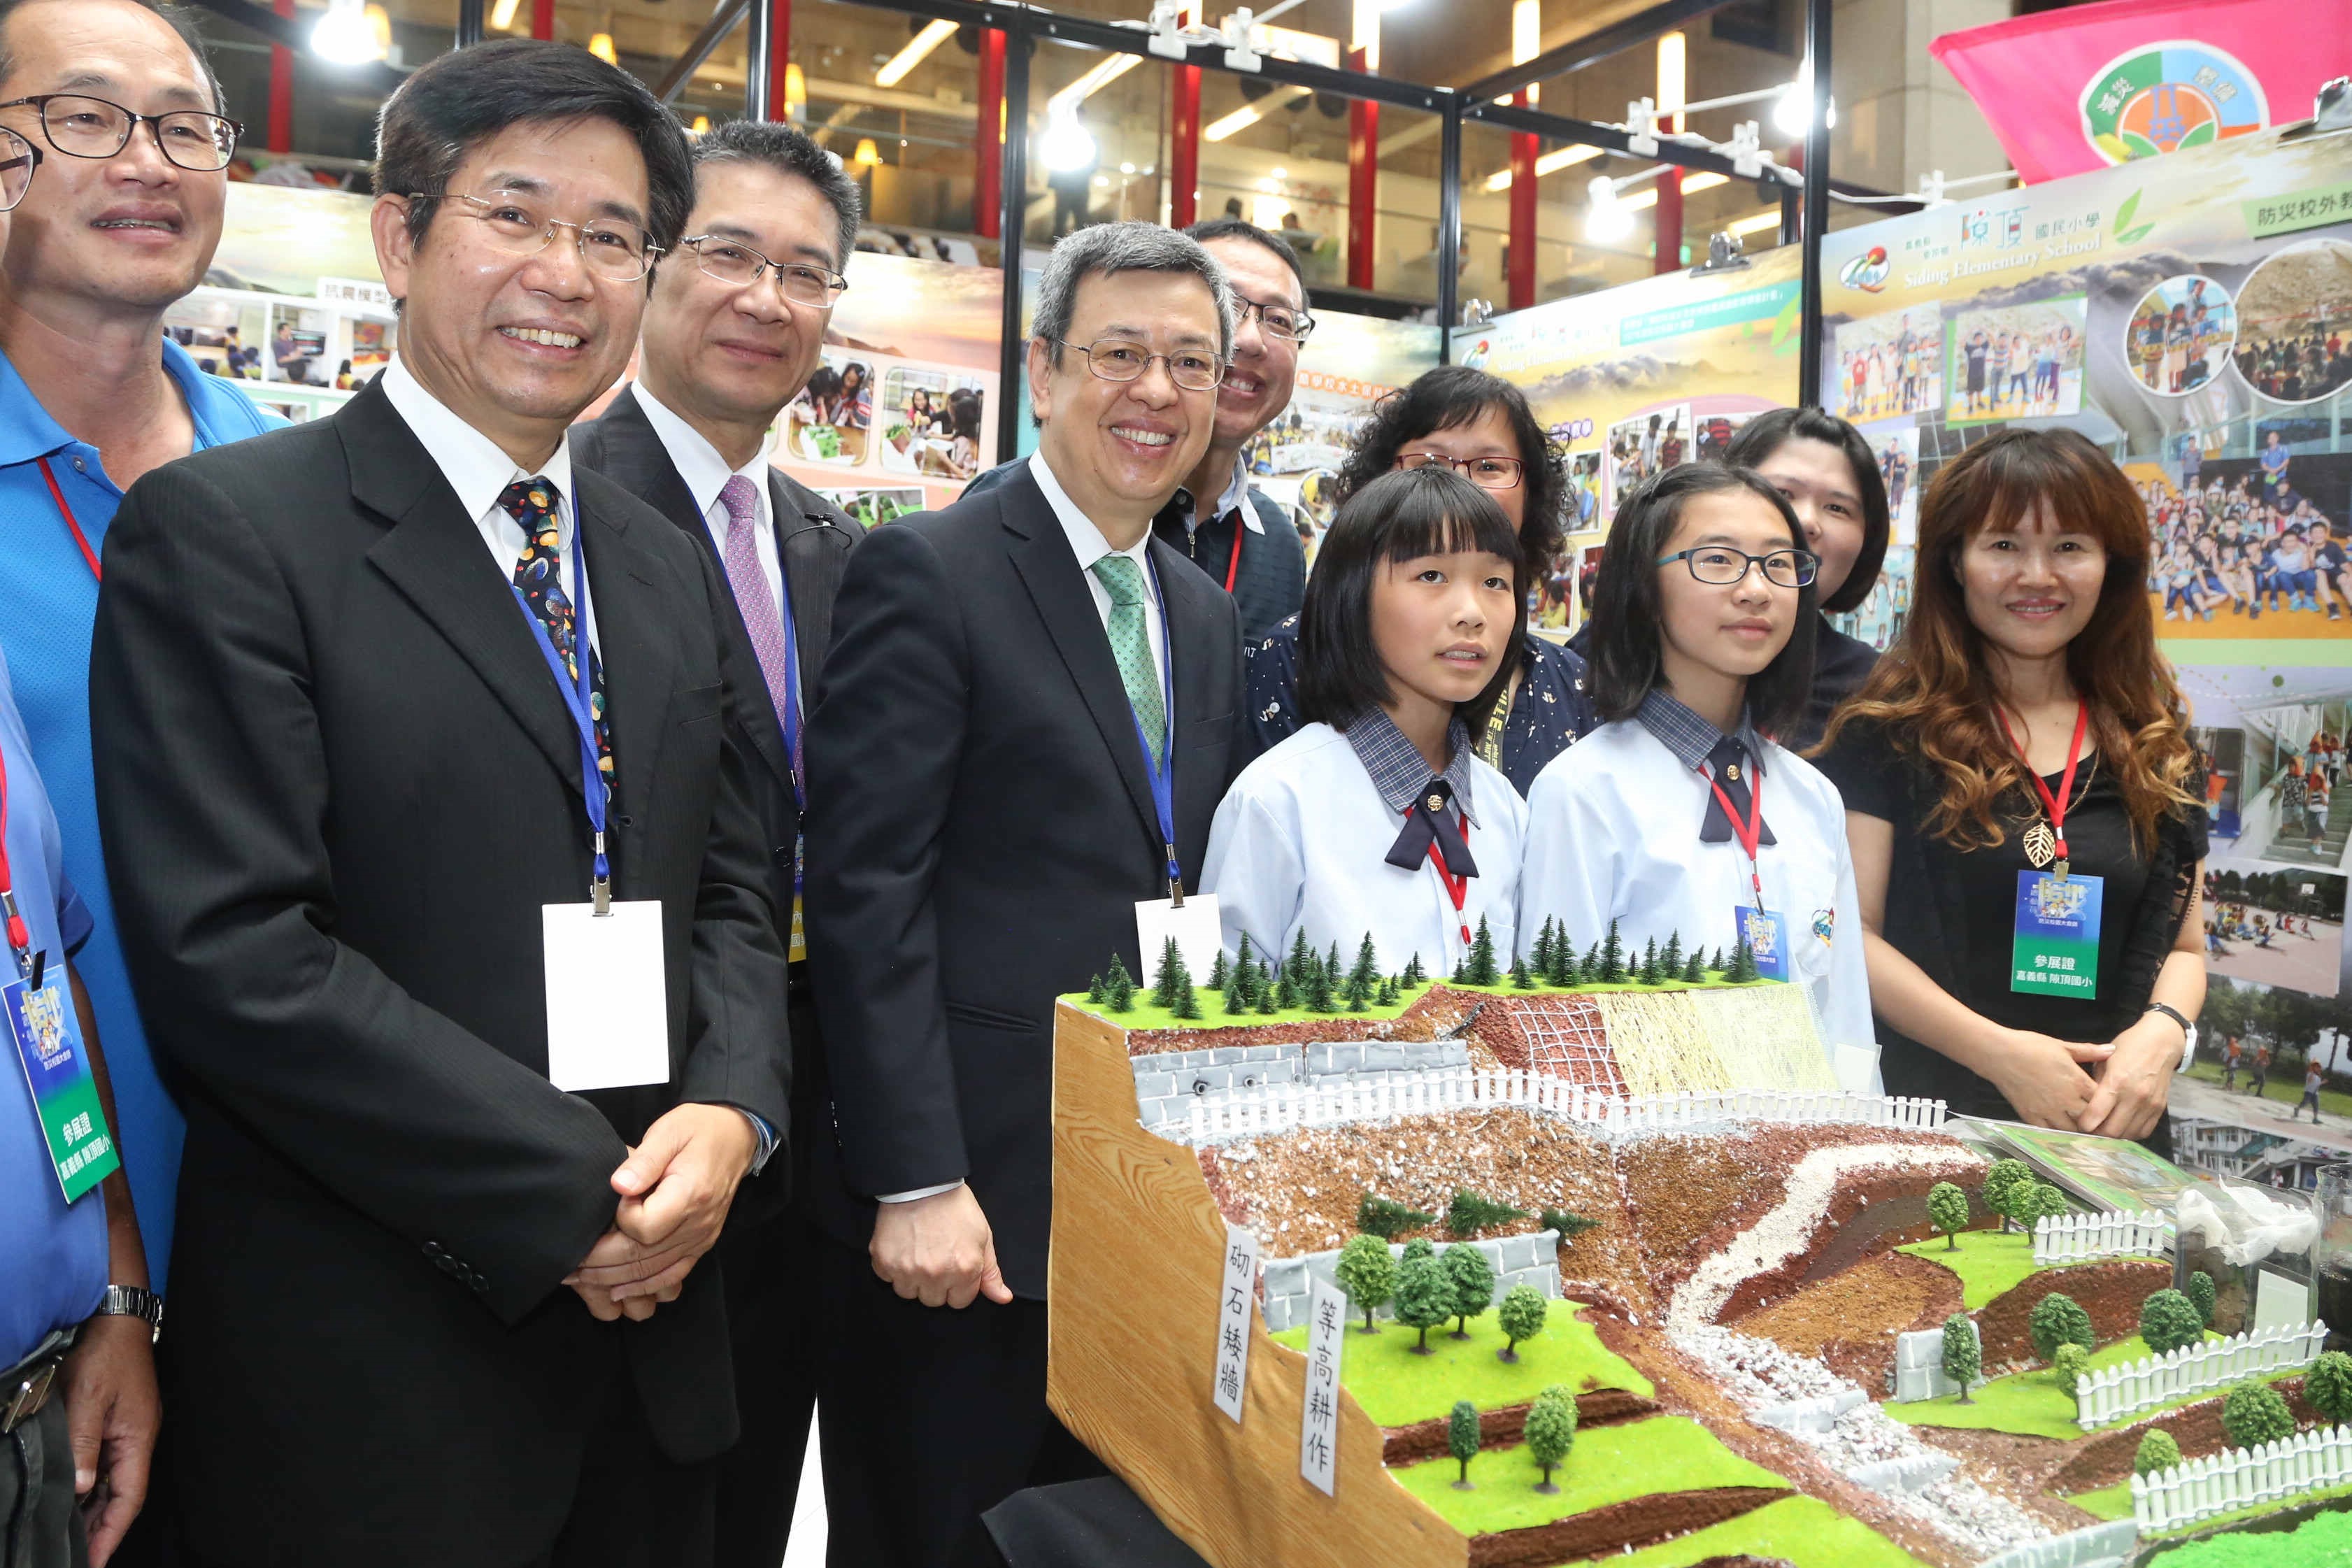 Cover By The Gathering of Disaster-resilient Schools: Eight Ministries Collaborate on Disaster Risk Reduction Education, Demonstrate Achievements through a Powerful Pop-up Exhibition at Taipei Main Station